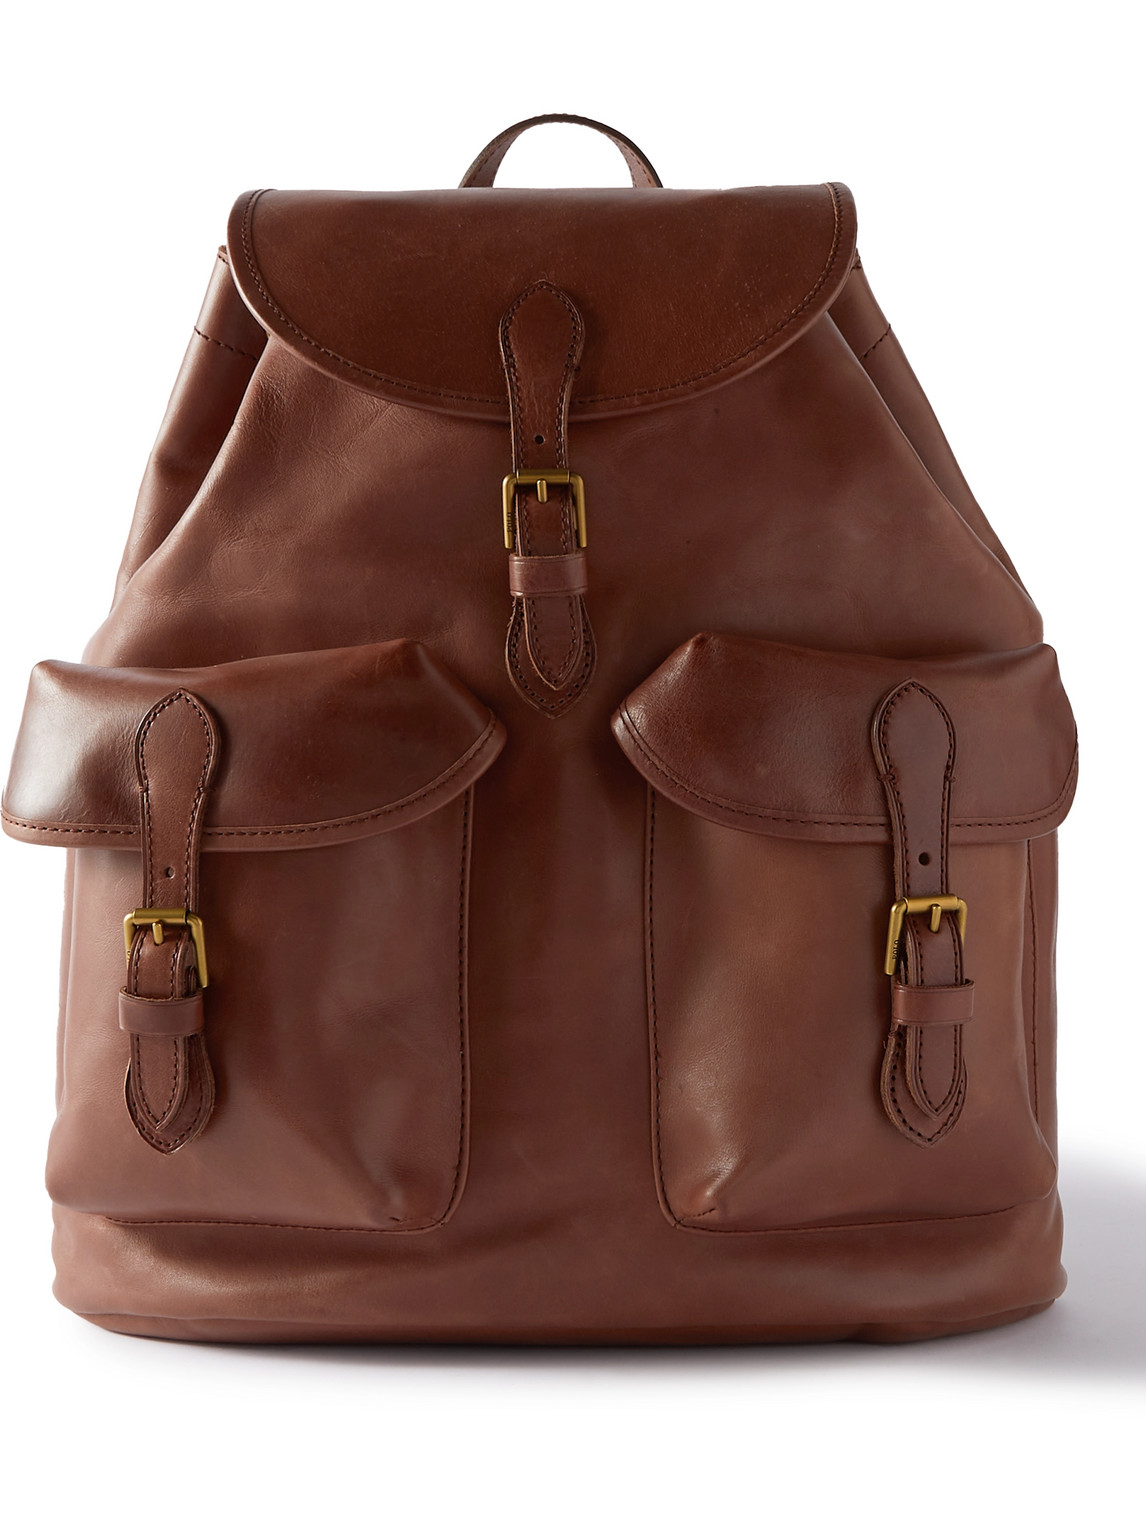 POLO RALPH LAUREN LEATHER BACKPACK